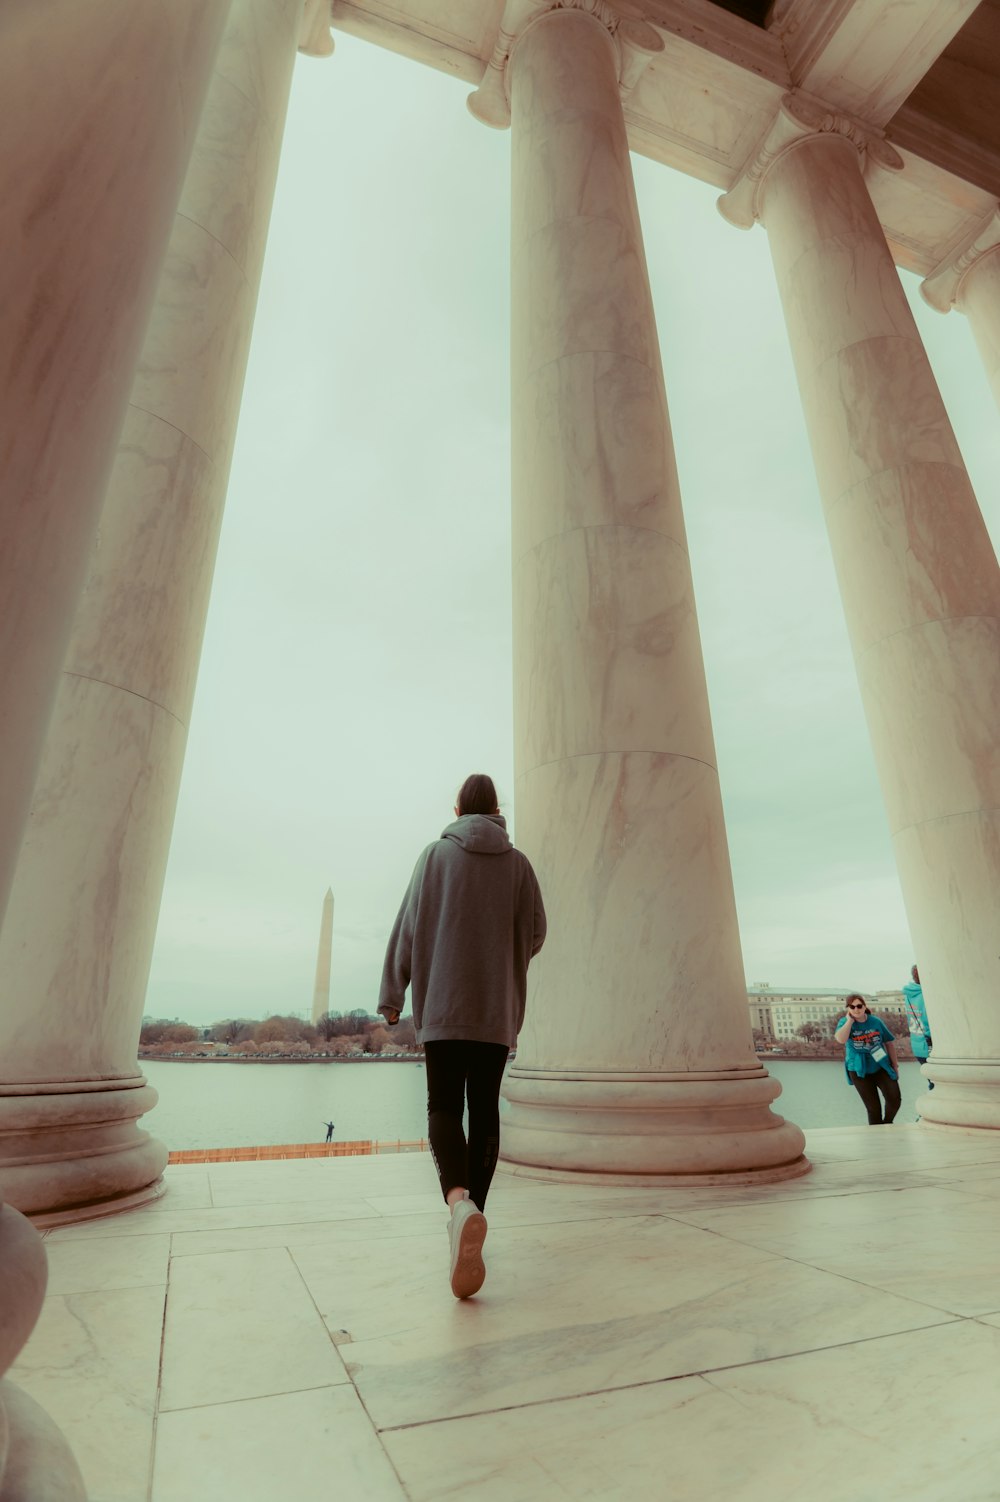 a person walking in front of a row of pillars